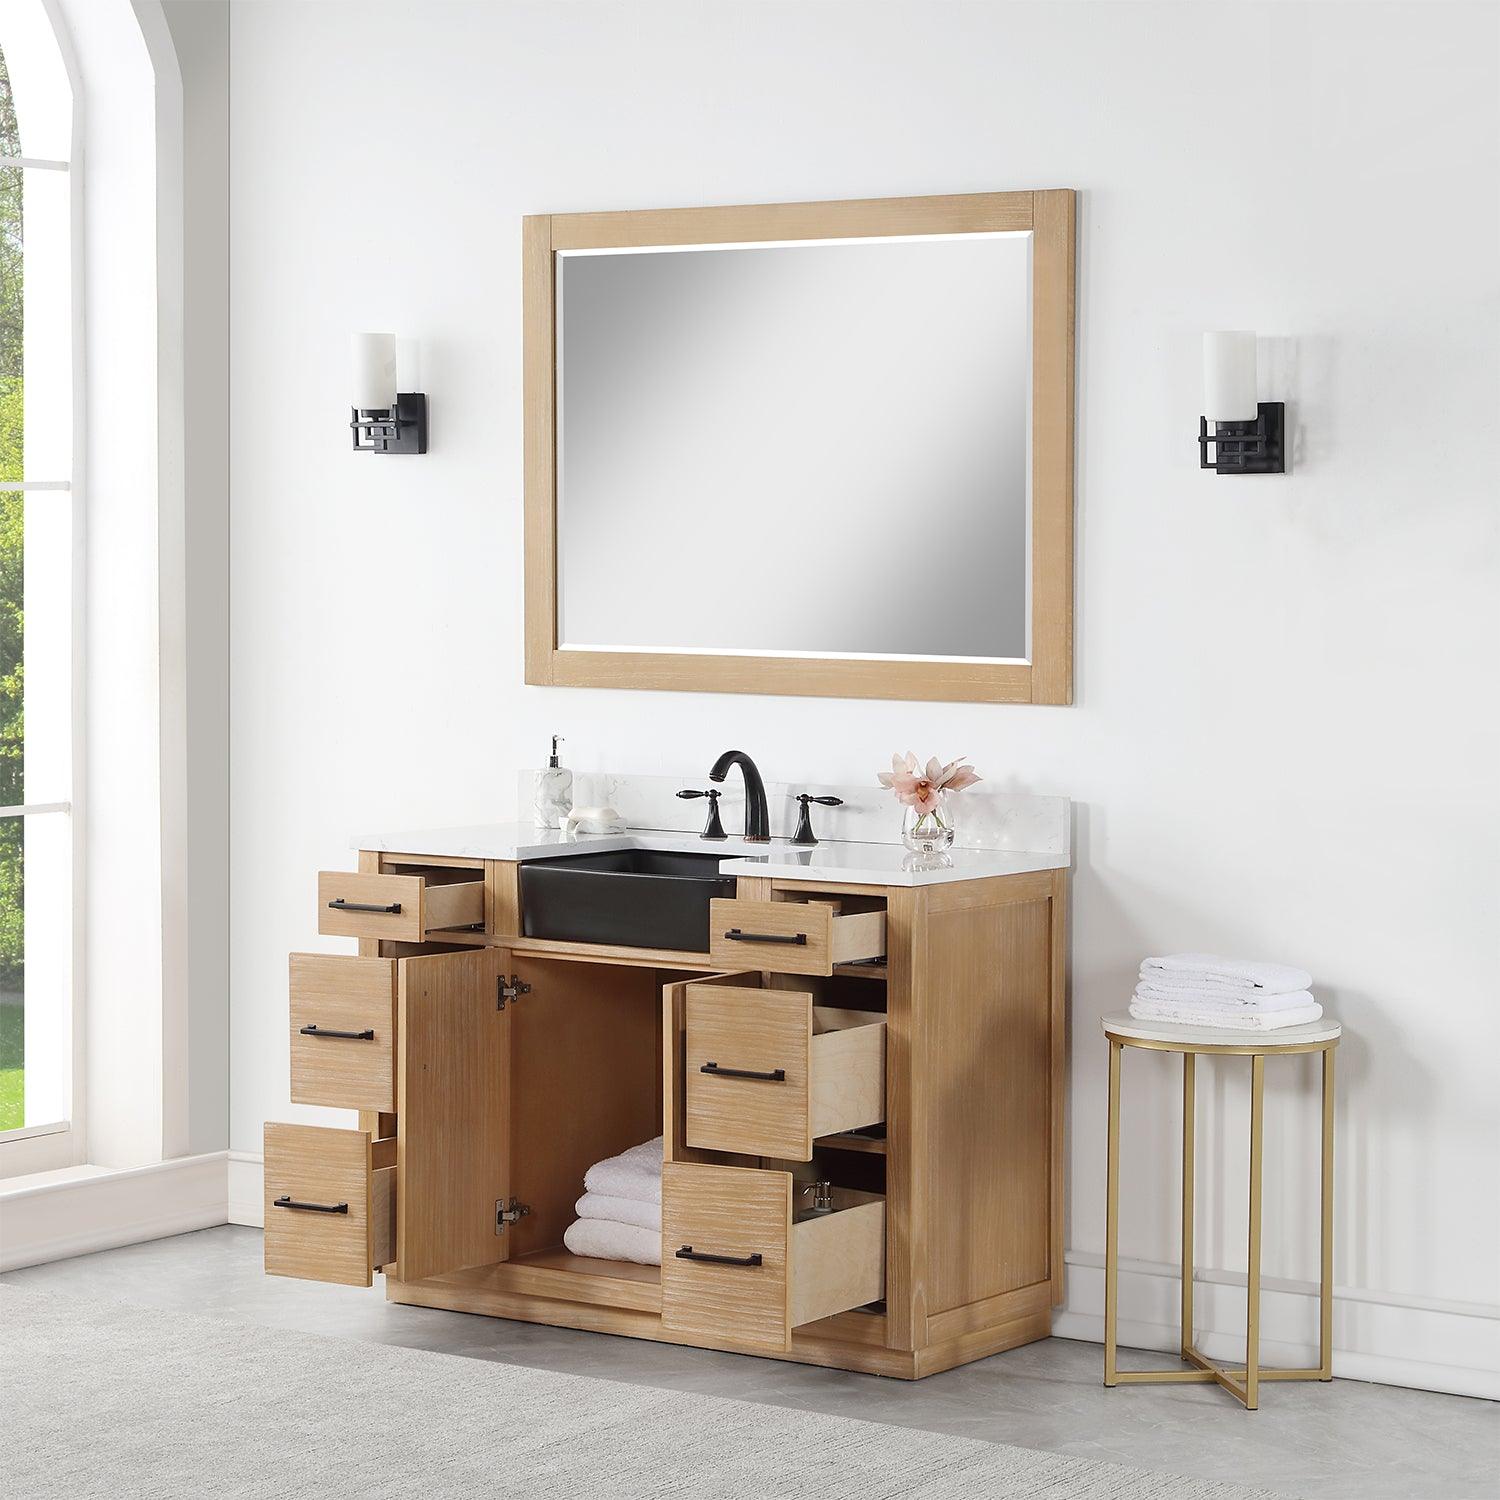 Altair Novago Single Bathroom Vanity in Weathered Pine with Aosta White Composite Stone Countertop and Farmhouse Sink with Optional Mirror - Sea & Stone Bath